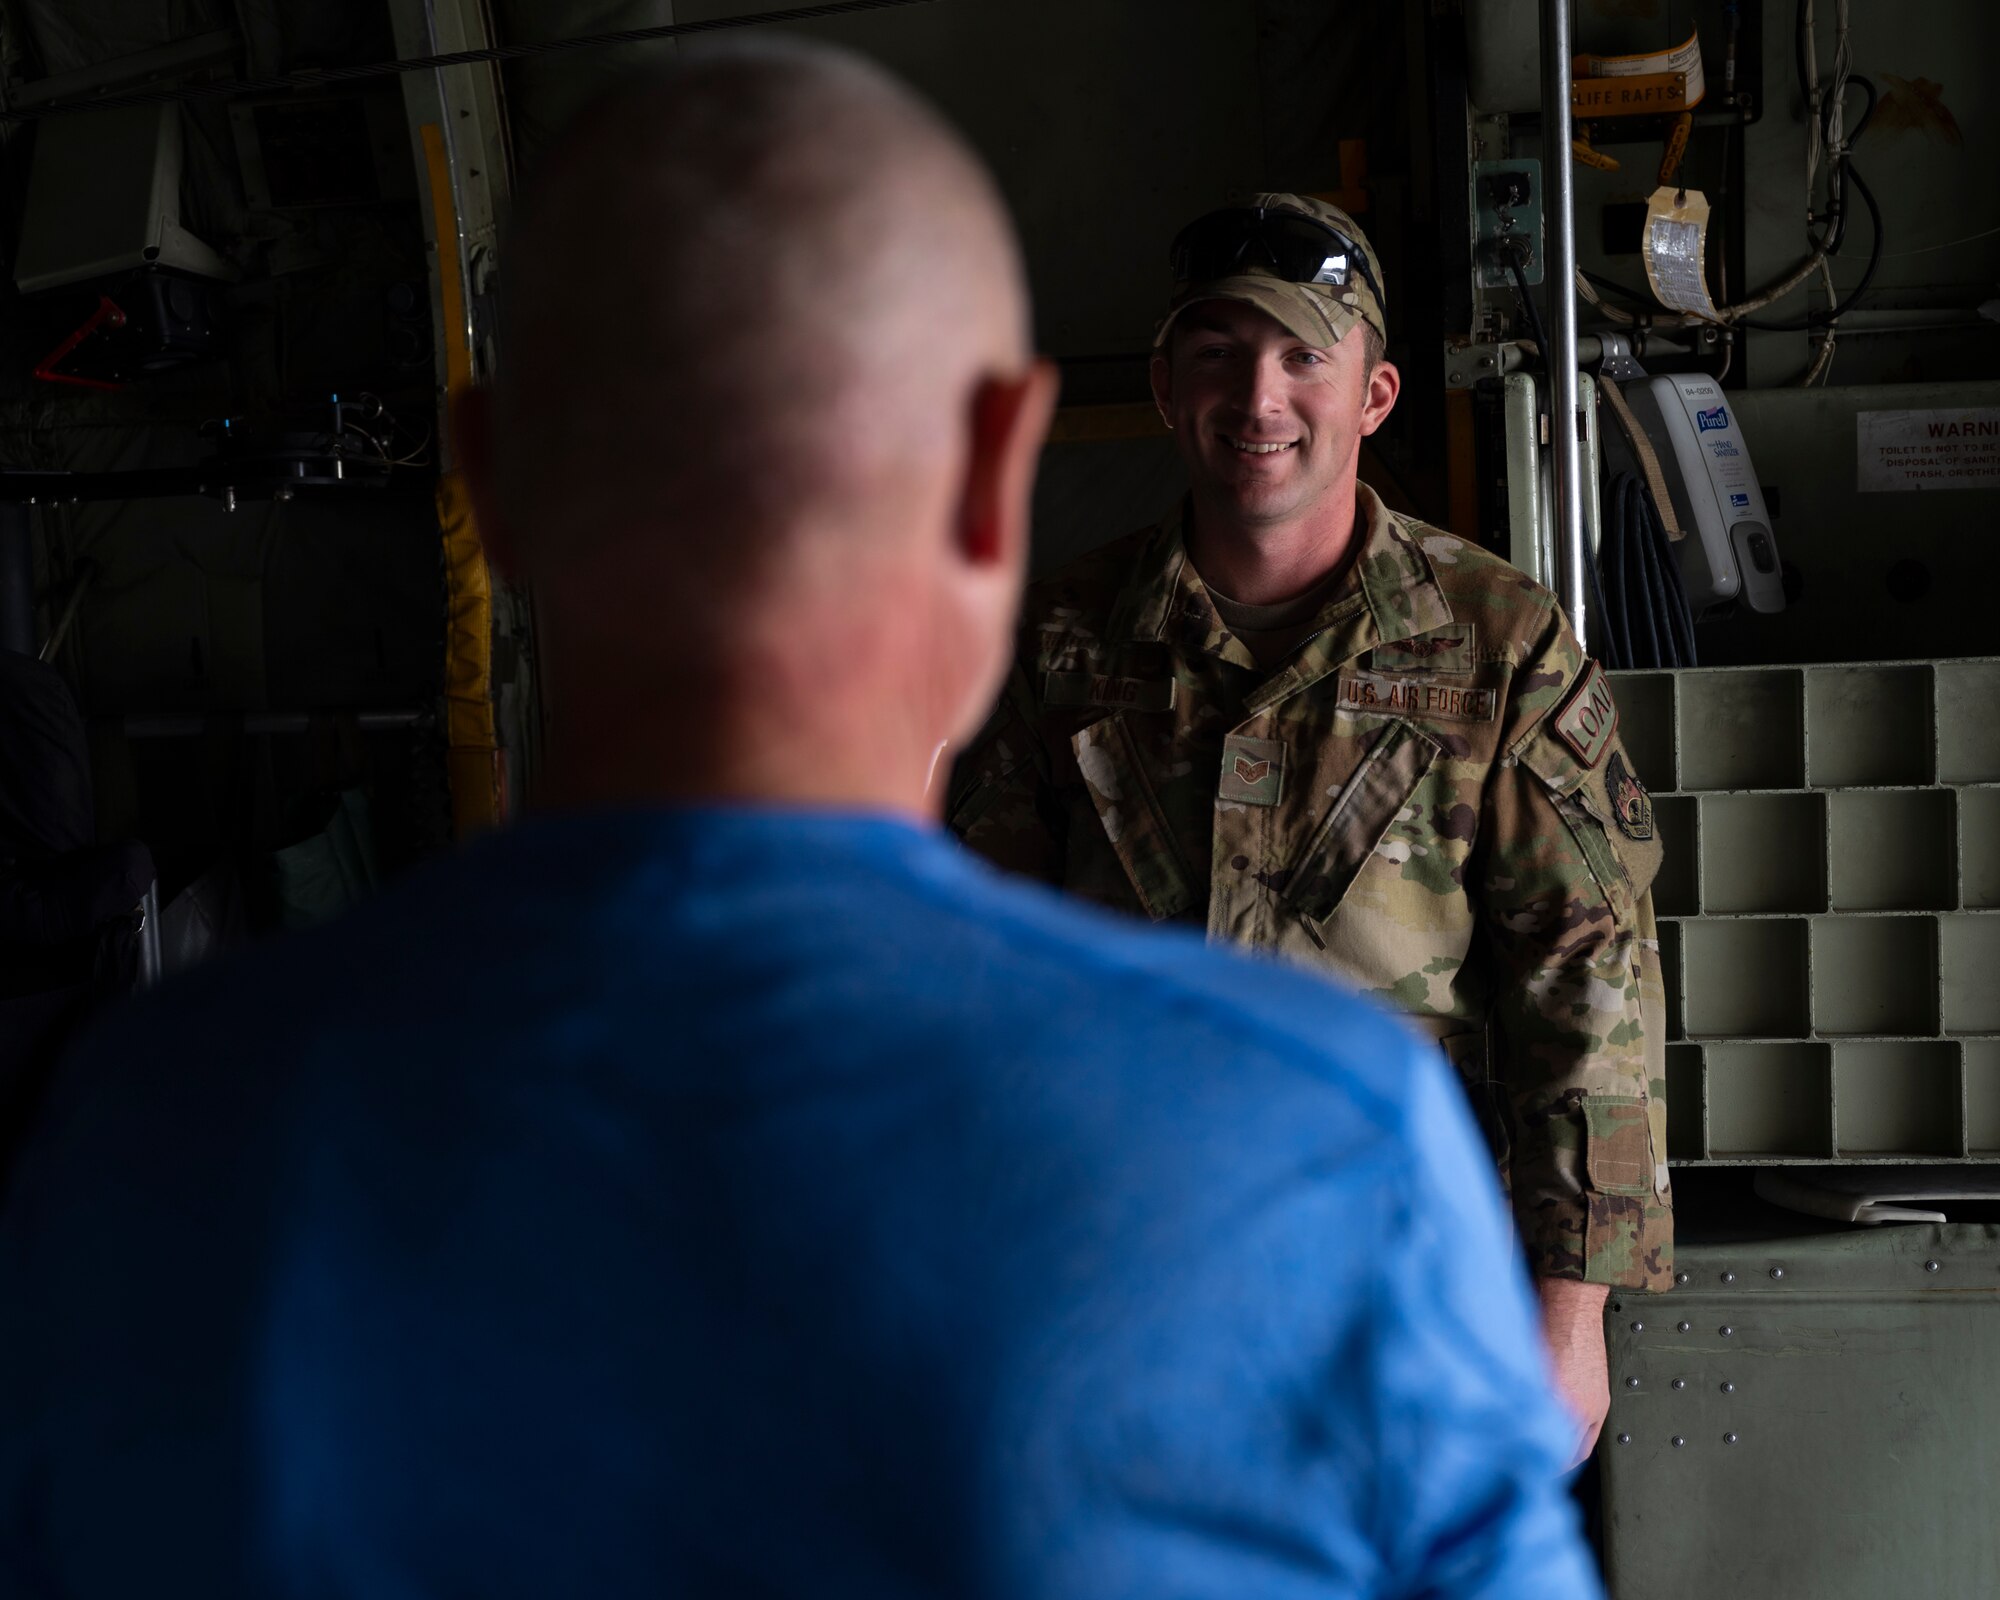 U.S. Air Force Staff Sgt. Brandon King, a loadmaster assigned to the 779th Expeditionary Airlift Squadron, interacts with a visitor during a C-130H Hercules tour at Ali Al Salem Air Base, Kuwait, Oct. 9, 2021.